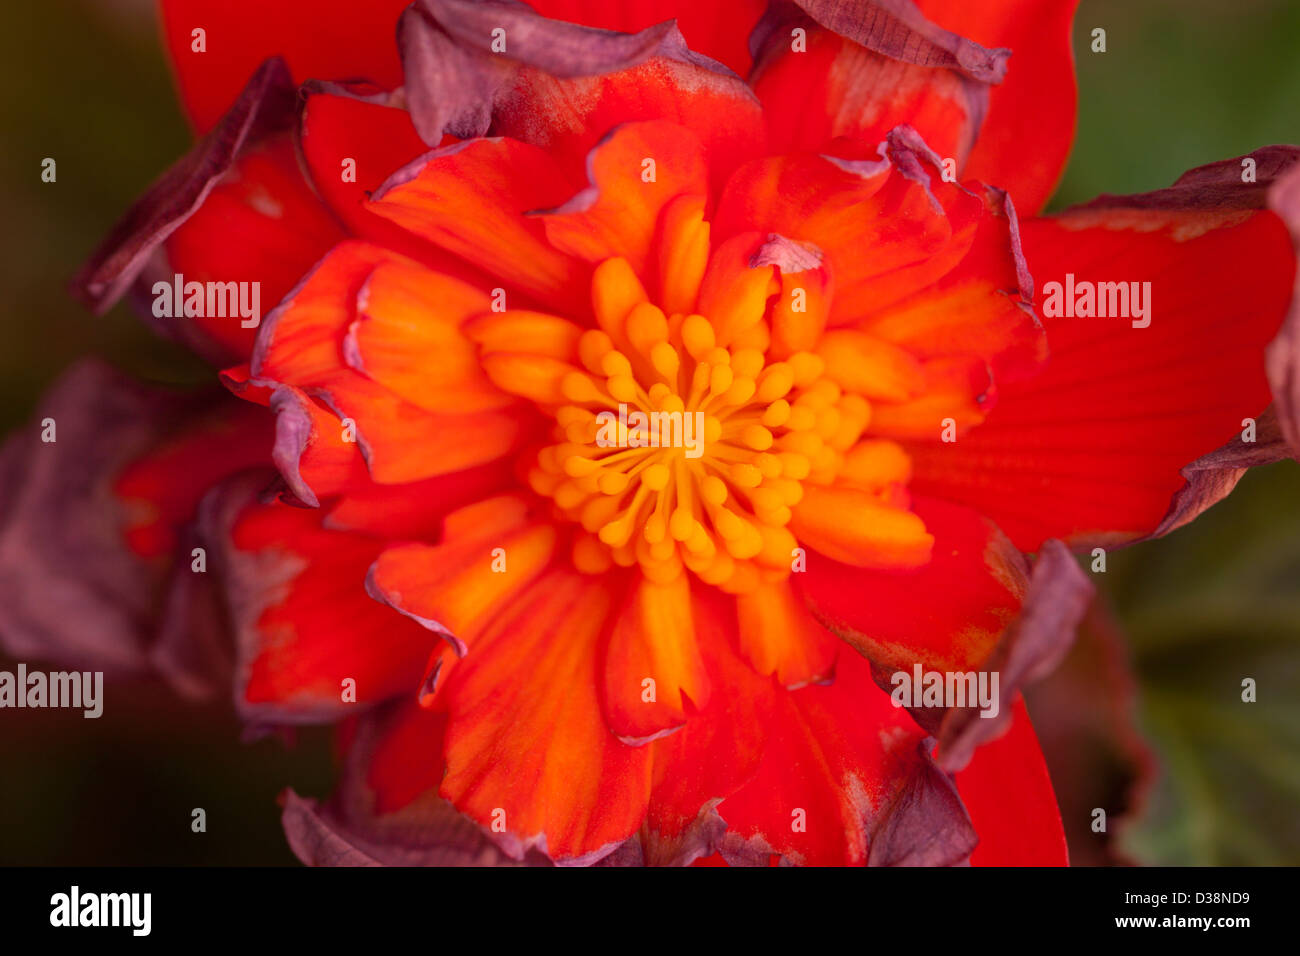 red flower drying wilting wilted bright color colorful Stock Photo